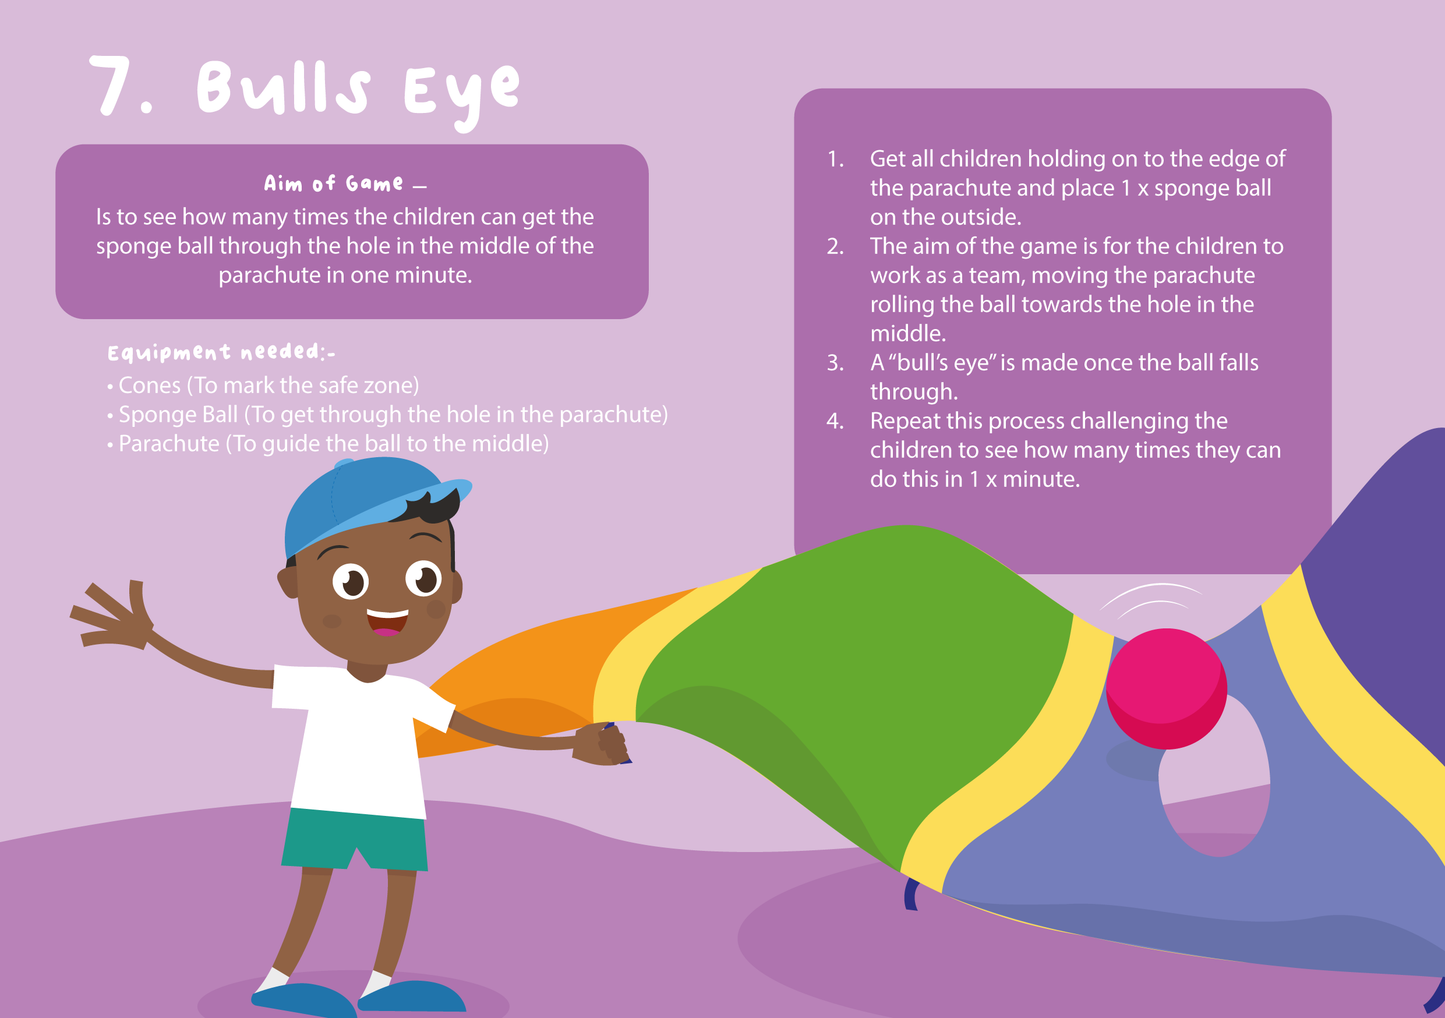 Instructions on how to play Bulls Eye with a parachute with children in Nurseries